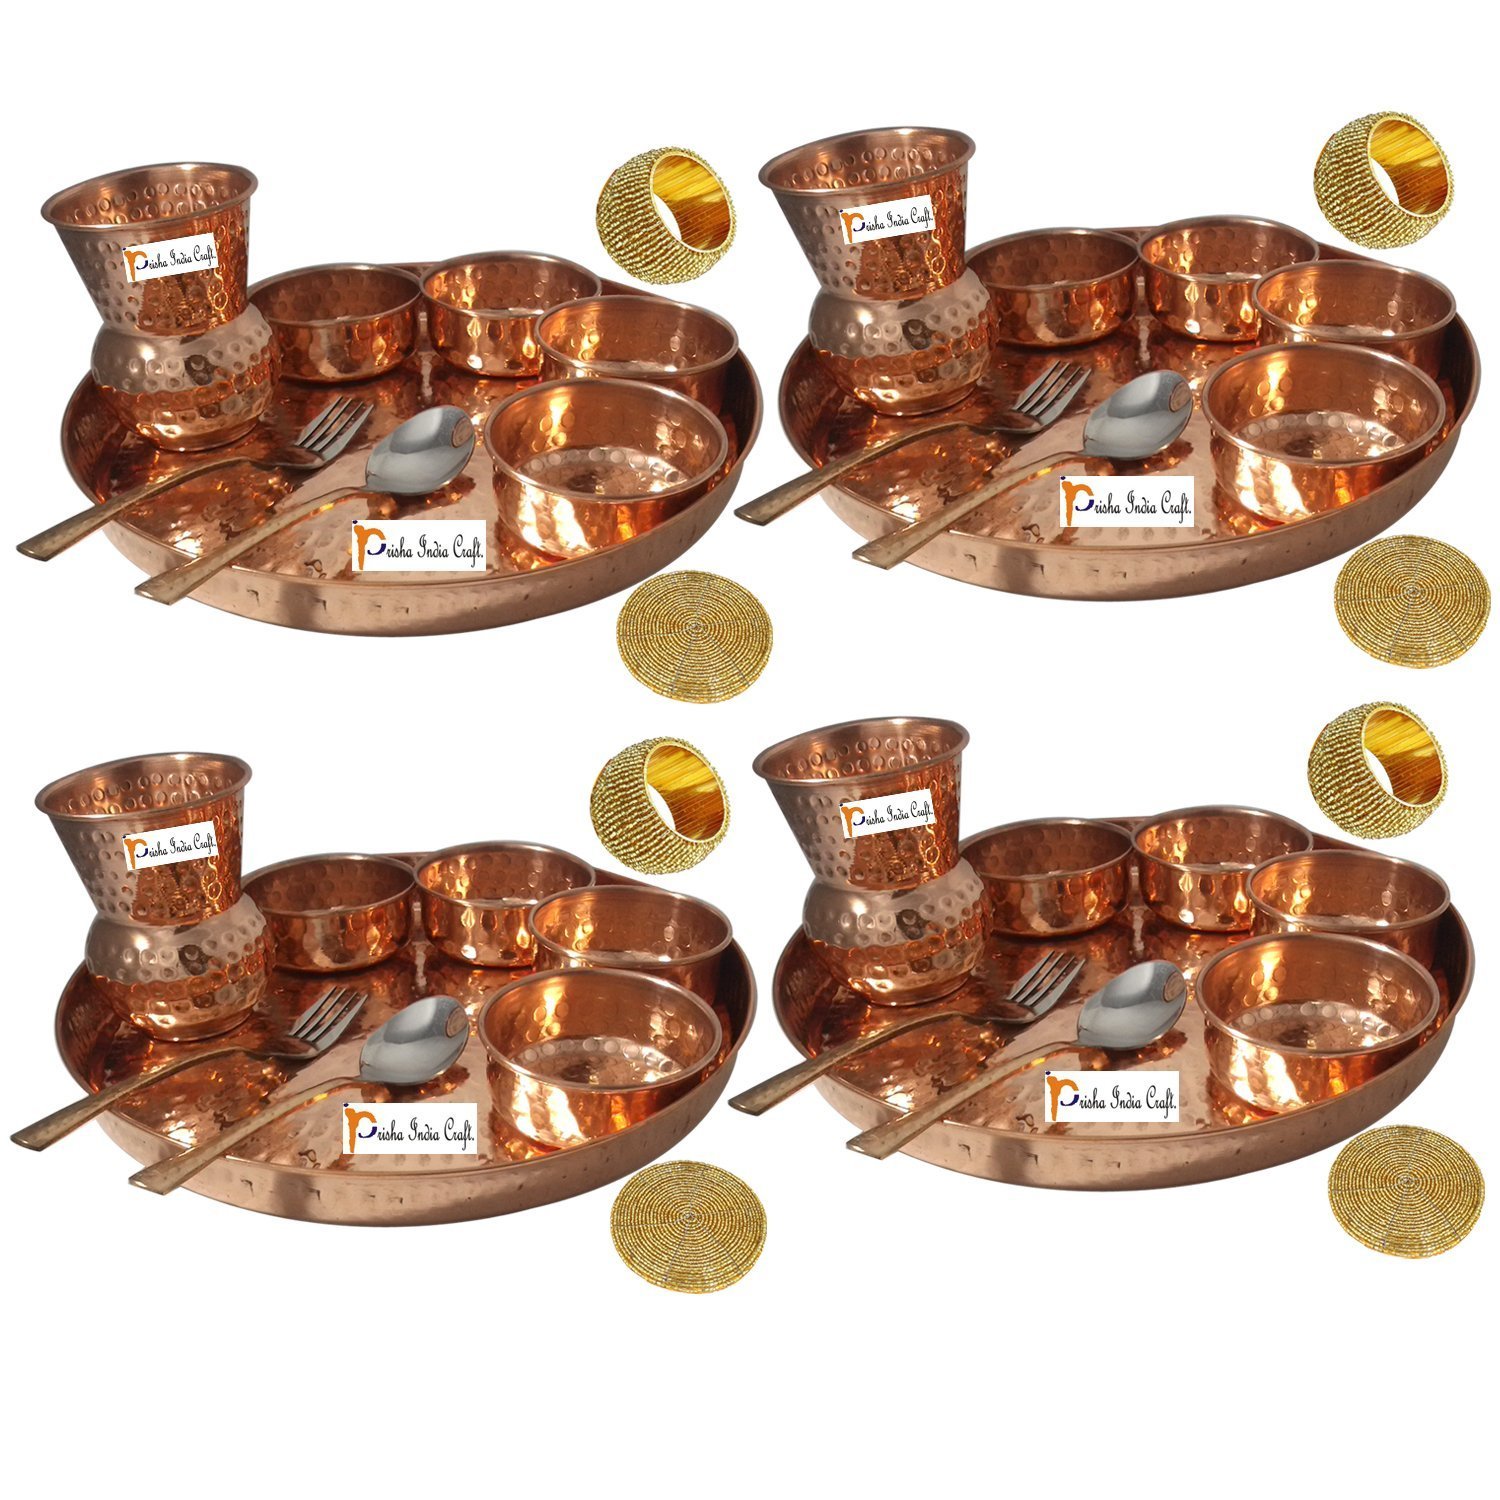 Prisha India Craft � Set of 4 Traditional Indian Dinnerware Pure Copper Dinner Set of Thali Plate, Bowl, Spoon, Fork, Glass - Diameter 12 Inch